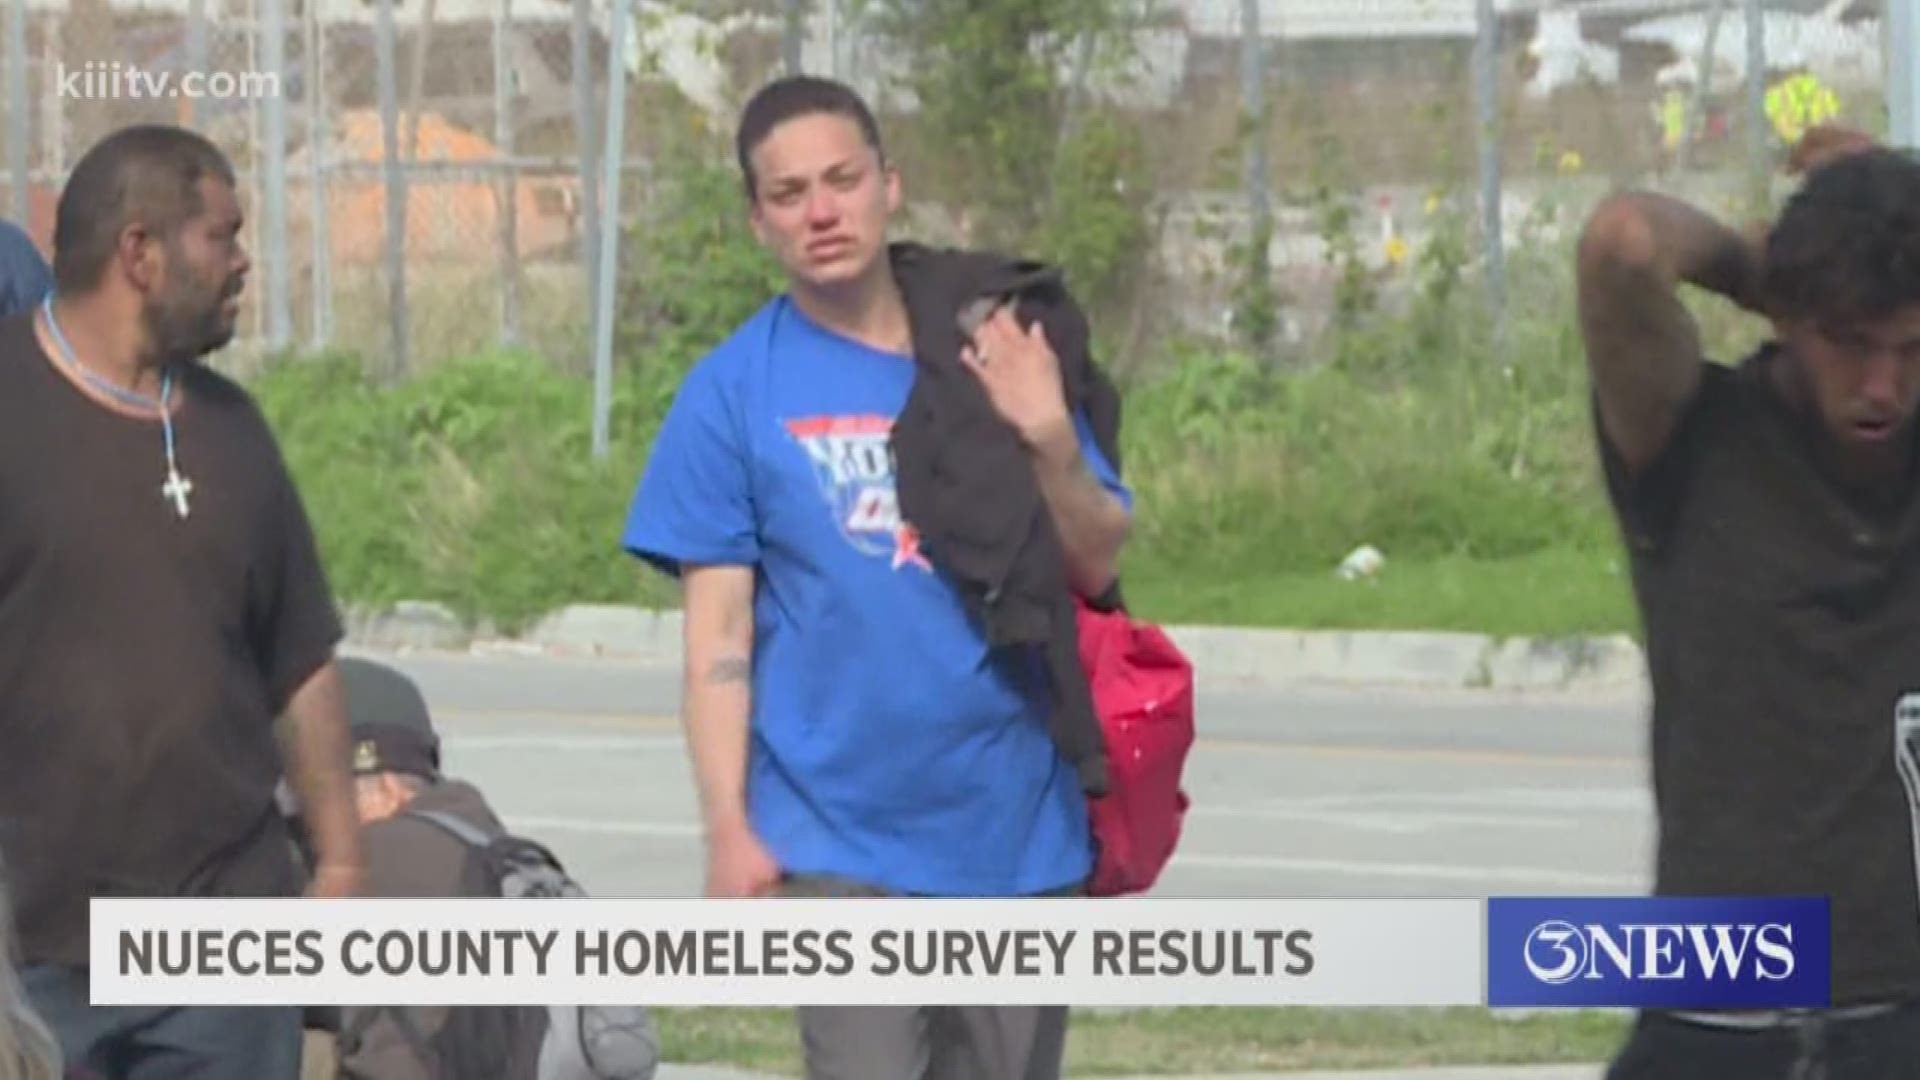 The numbers are in from a survey that took place over the weekend to try and count the homeless population.